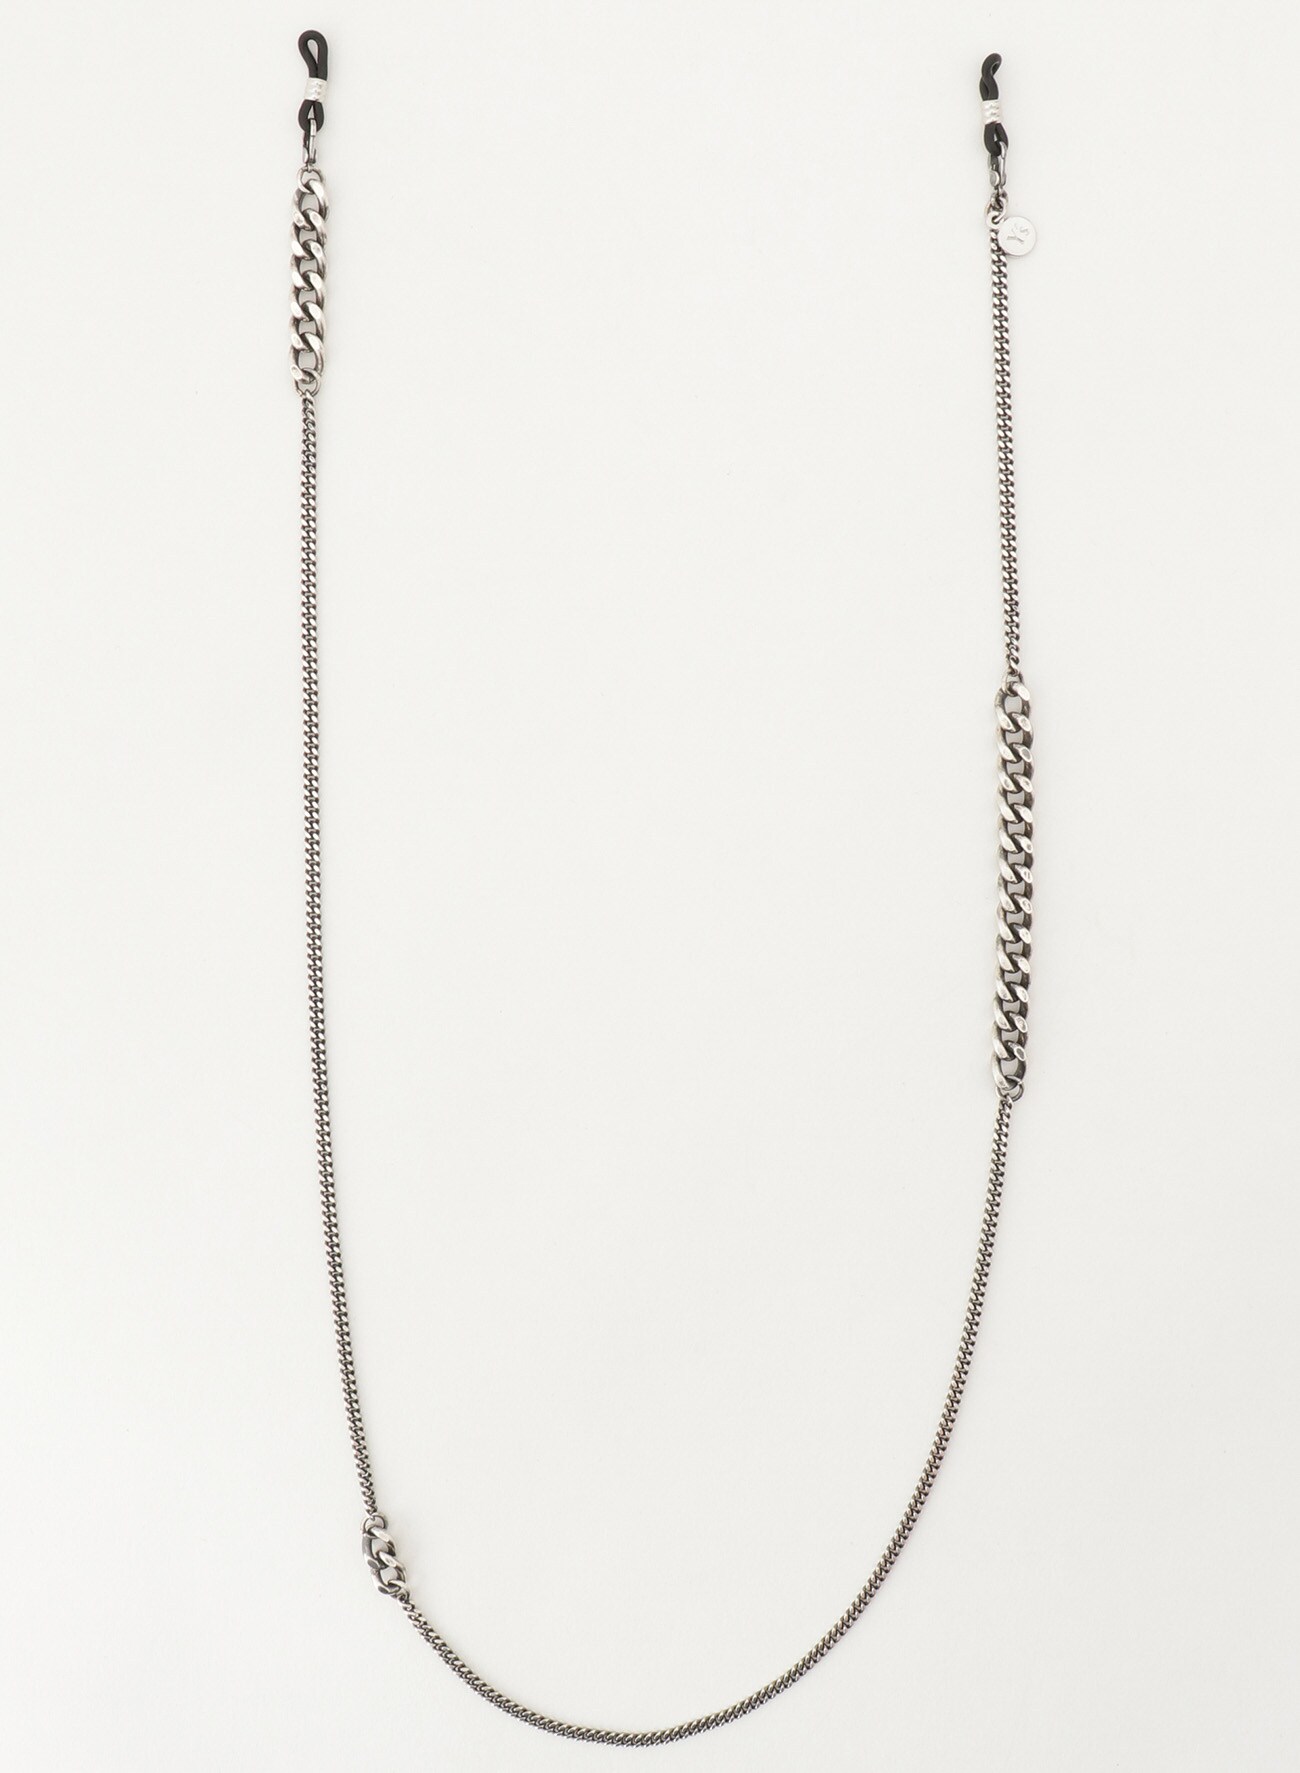 SILVER 925 COMBI 3 WAYS CHAIN NECKLACE